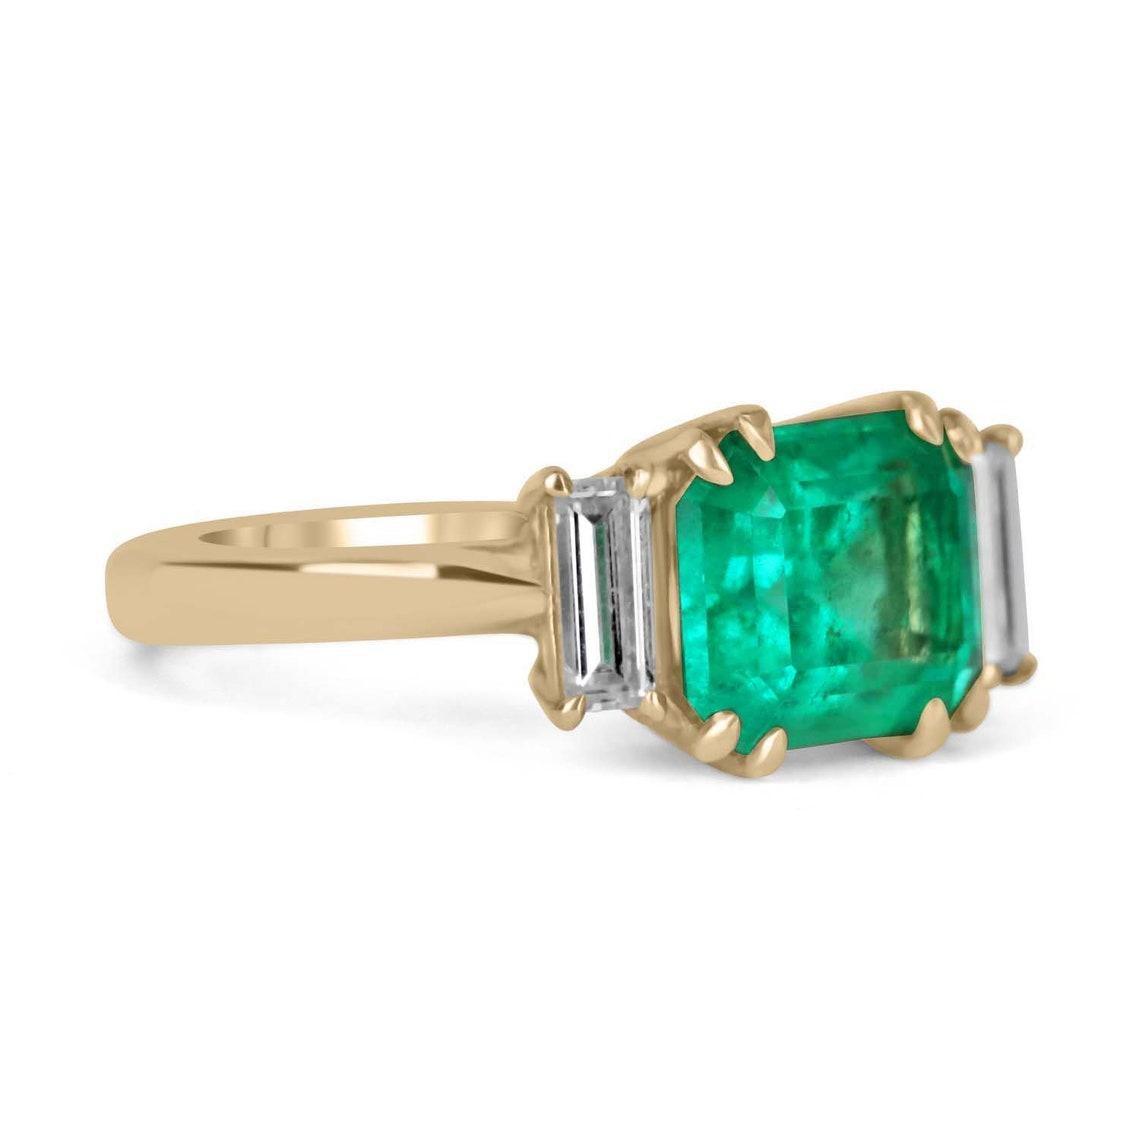 Featured is a magnificent, Colombian emerald and diamond ring. In the very center is a gorgeous, 2.85-carat Colombian emerald-emerald cut, set east to west and displays a stunning, vivid green color, and excellent luster. Accented on the sides, are